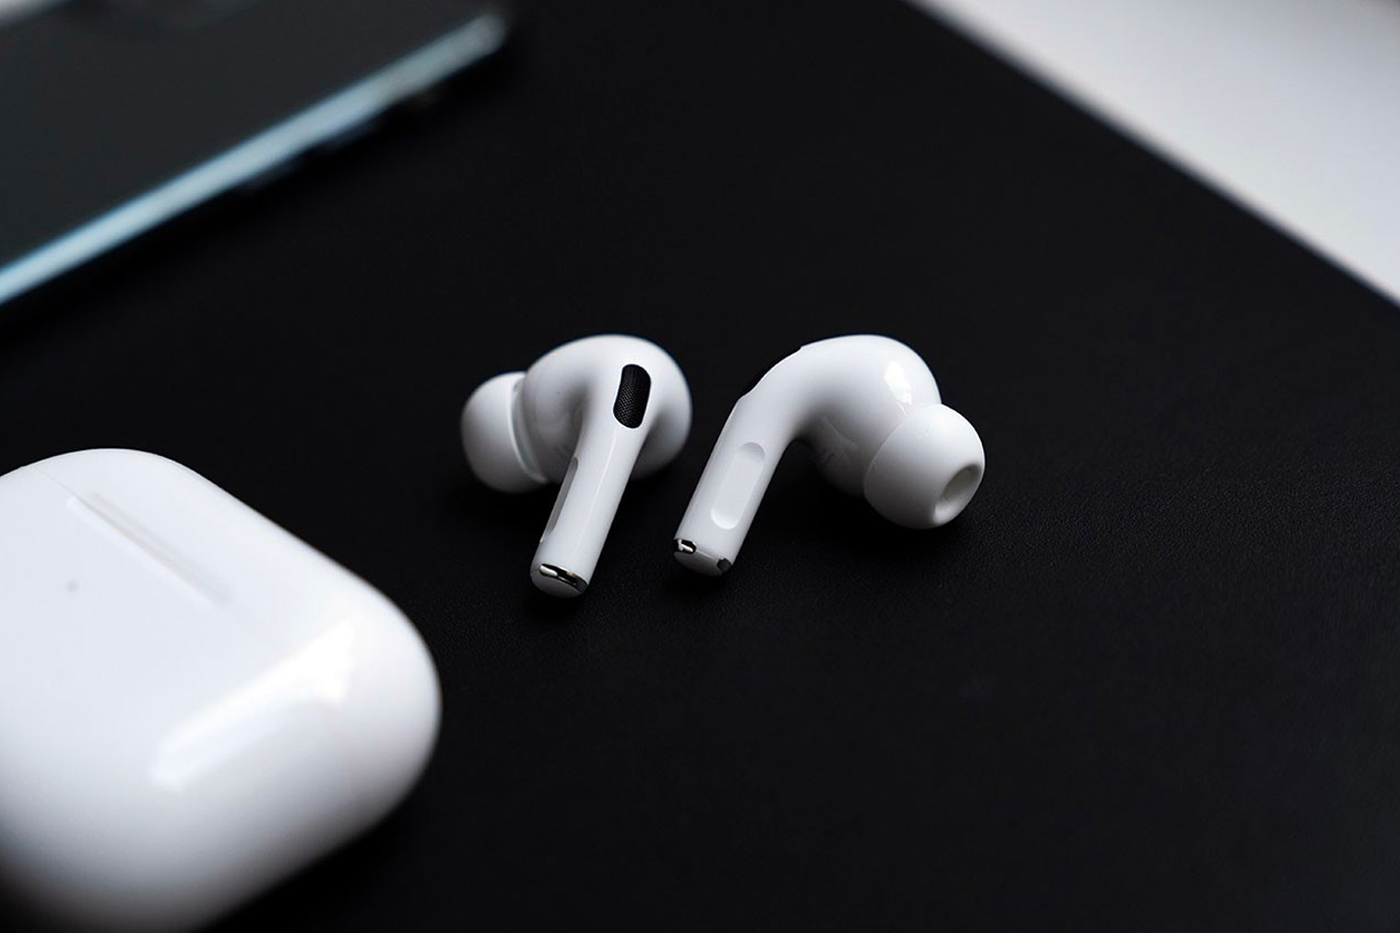 Take Your Calls Anywhere with Apple AirPods 3